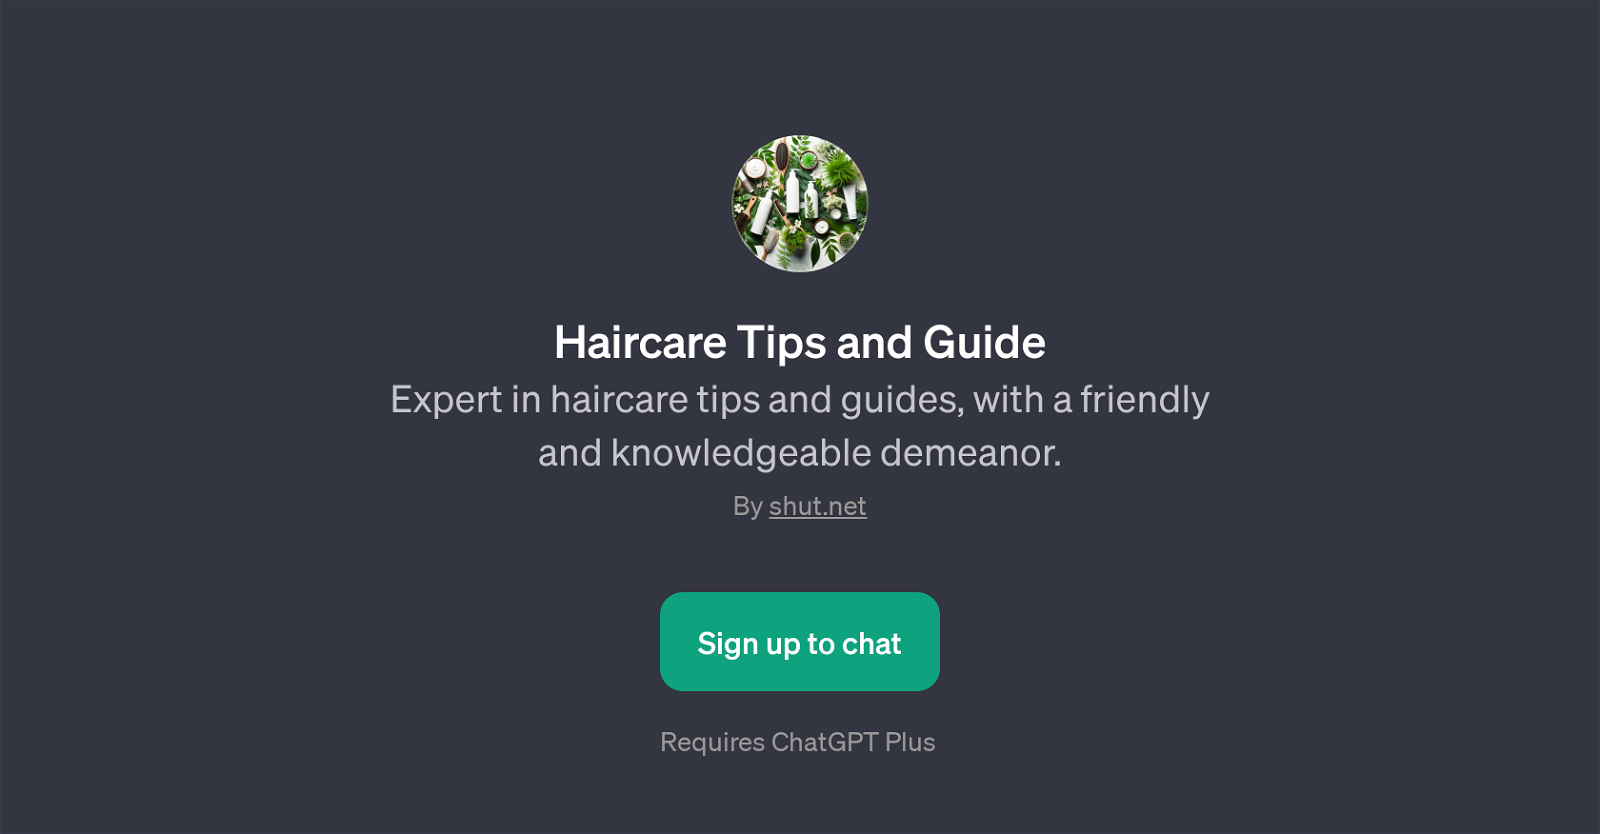 Haircare Tips and Guide website